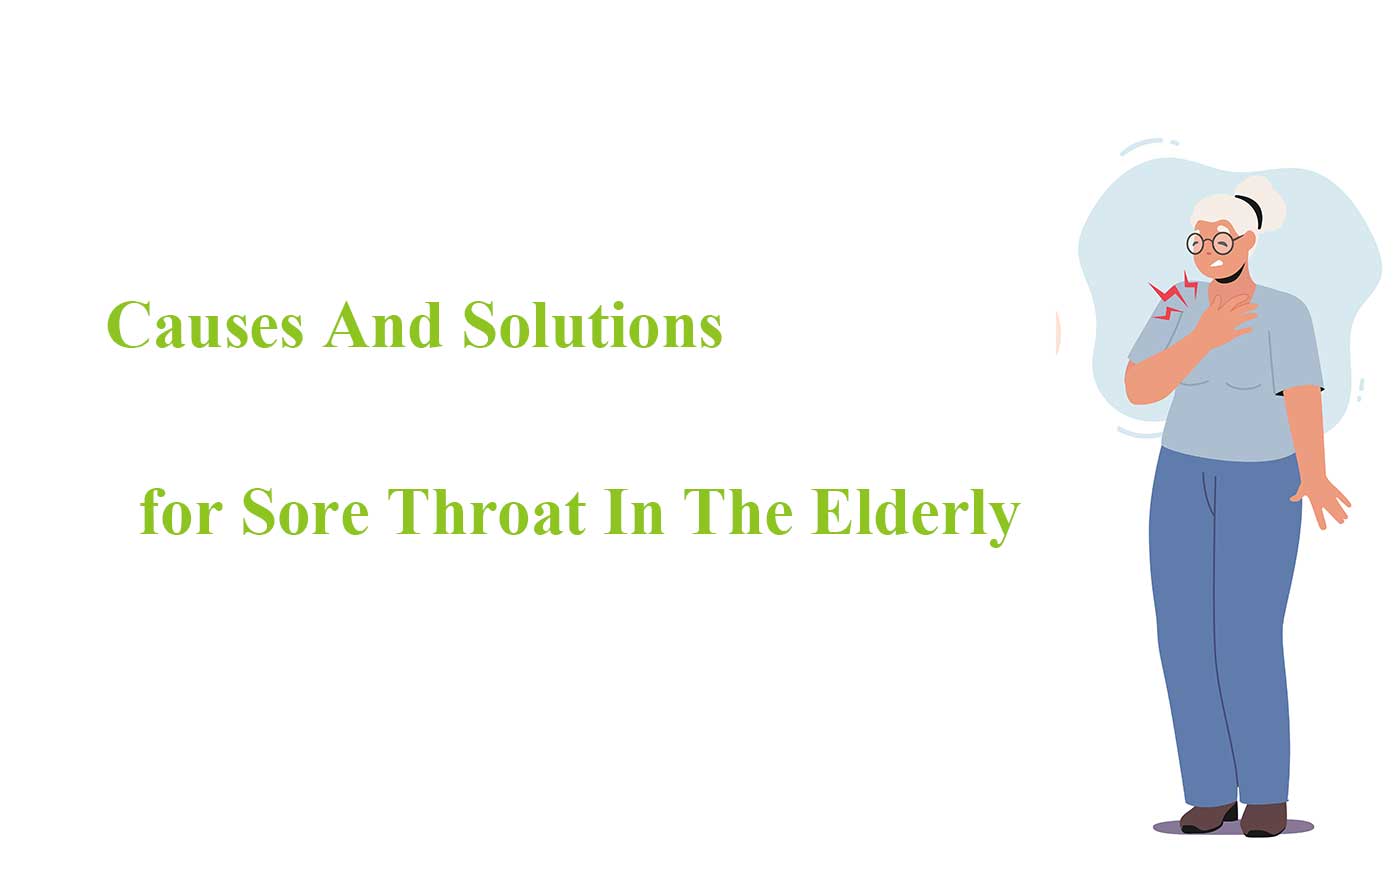 Causes And Solutions for Sore Throat In The Elderly